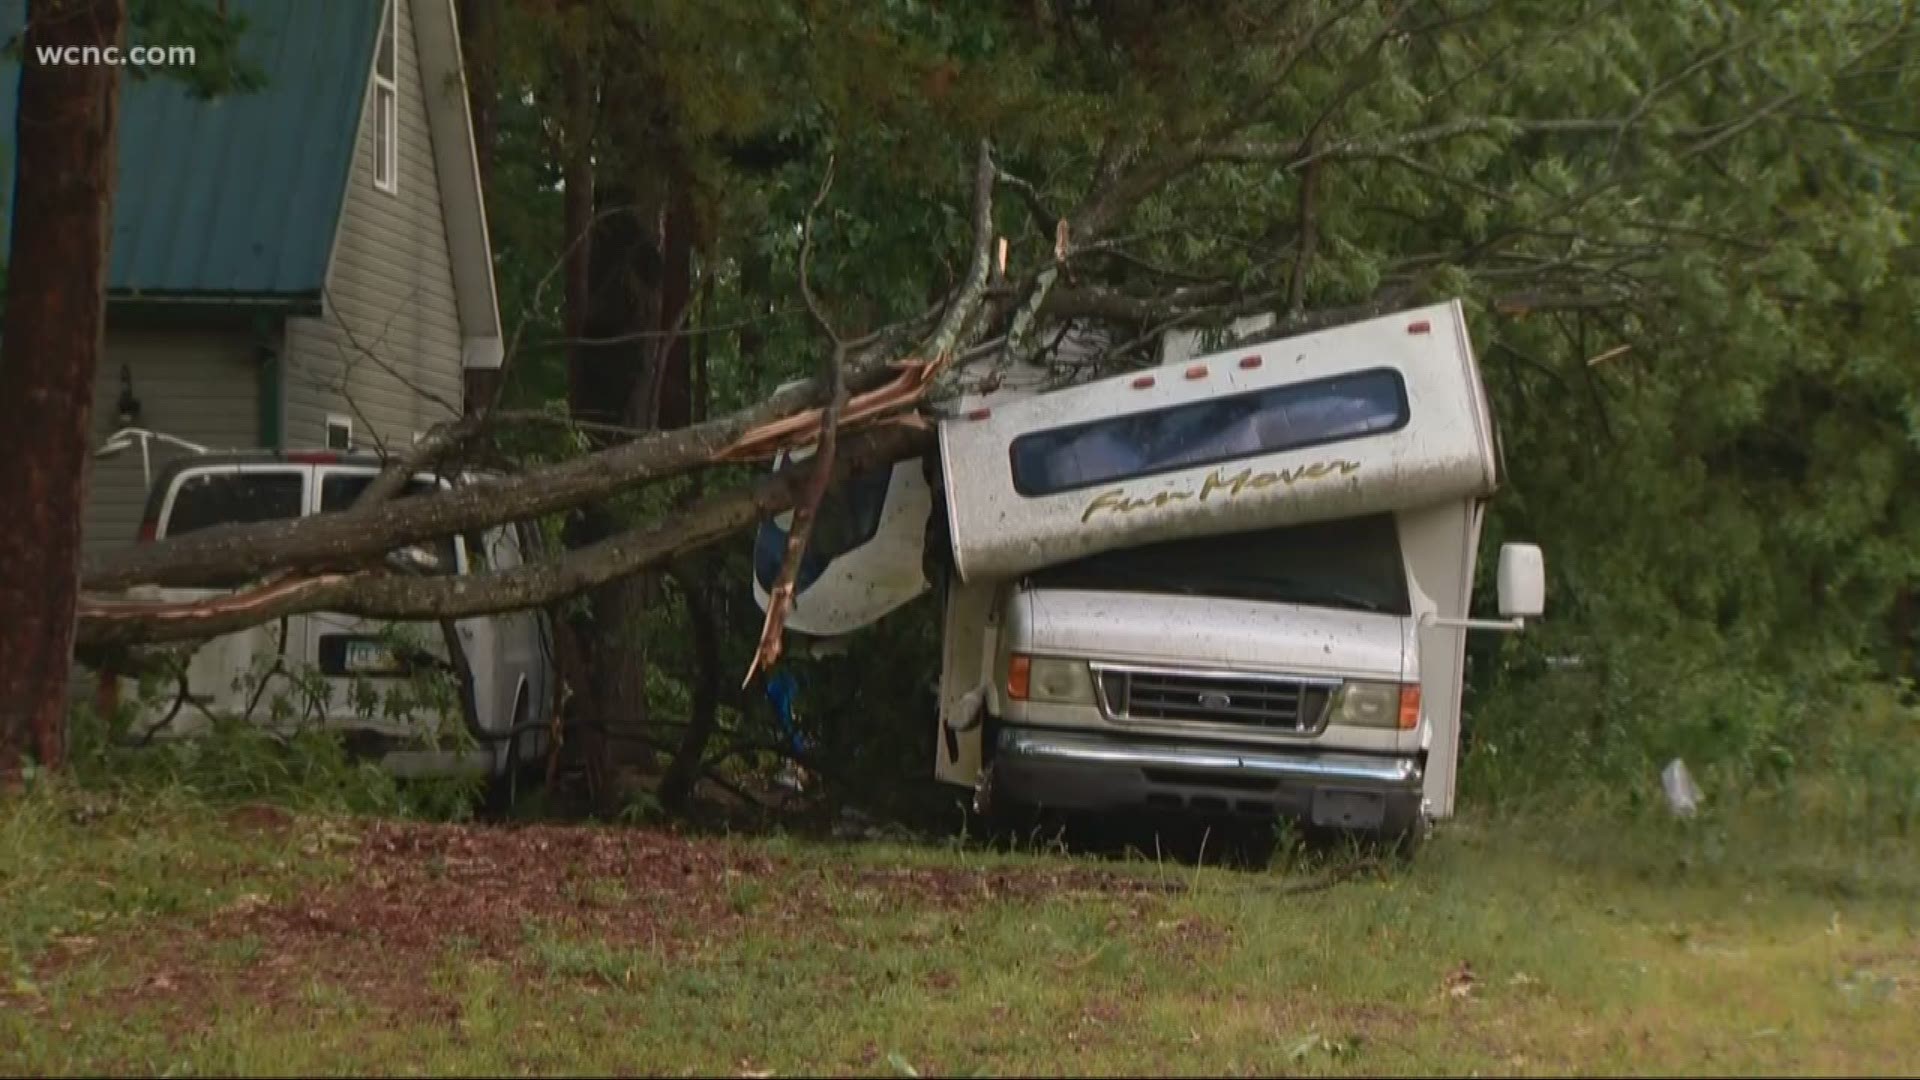 Several tornado and thunderstorm warnings were issued Friday afternoon as severe weather raced through the Carolinas.